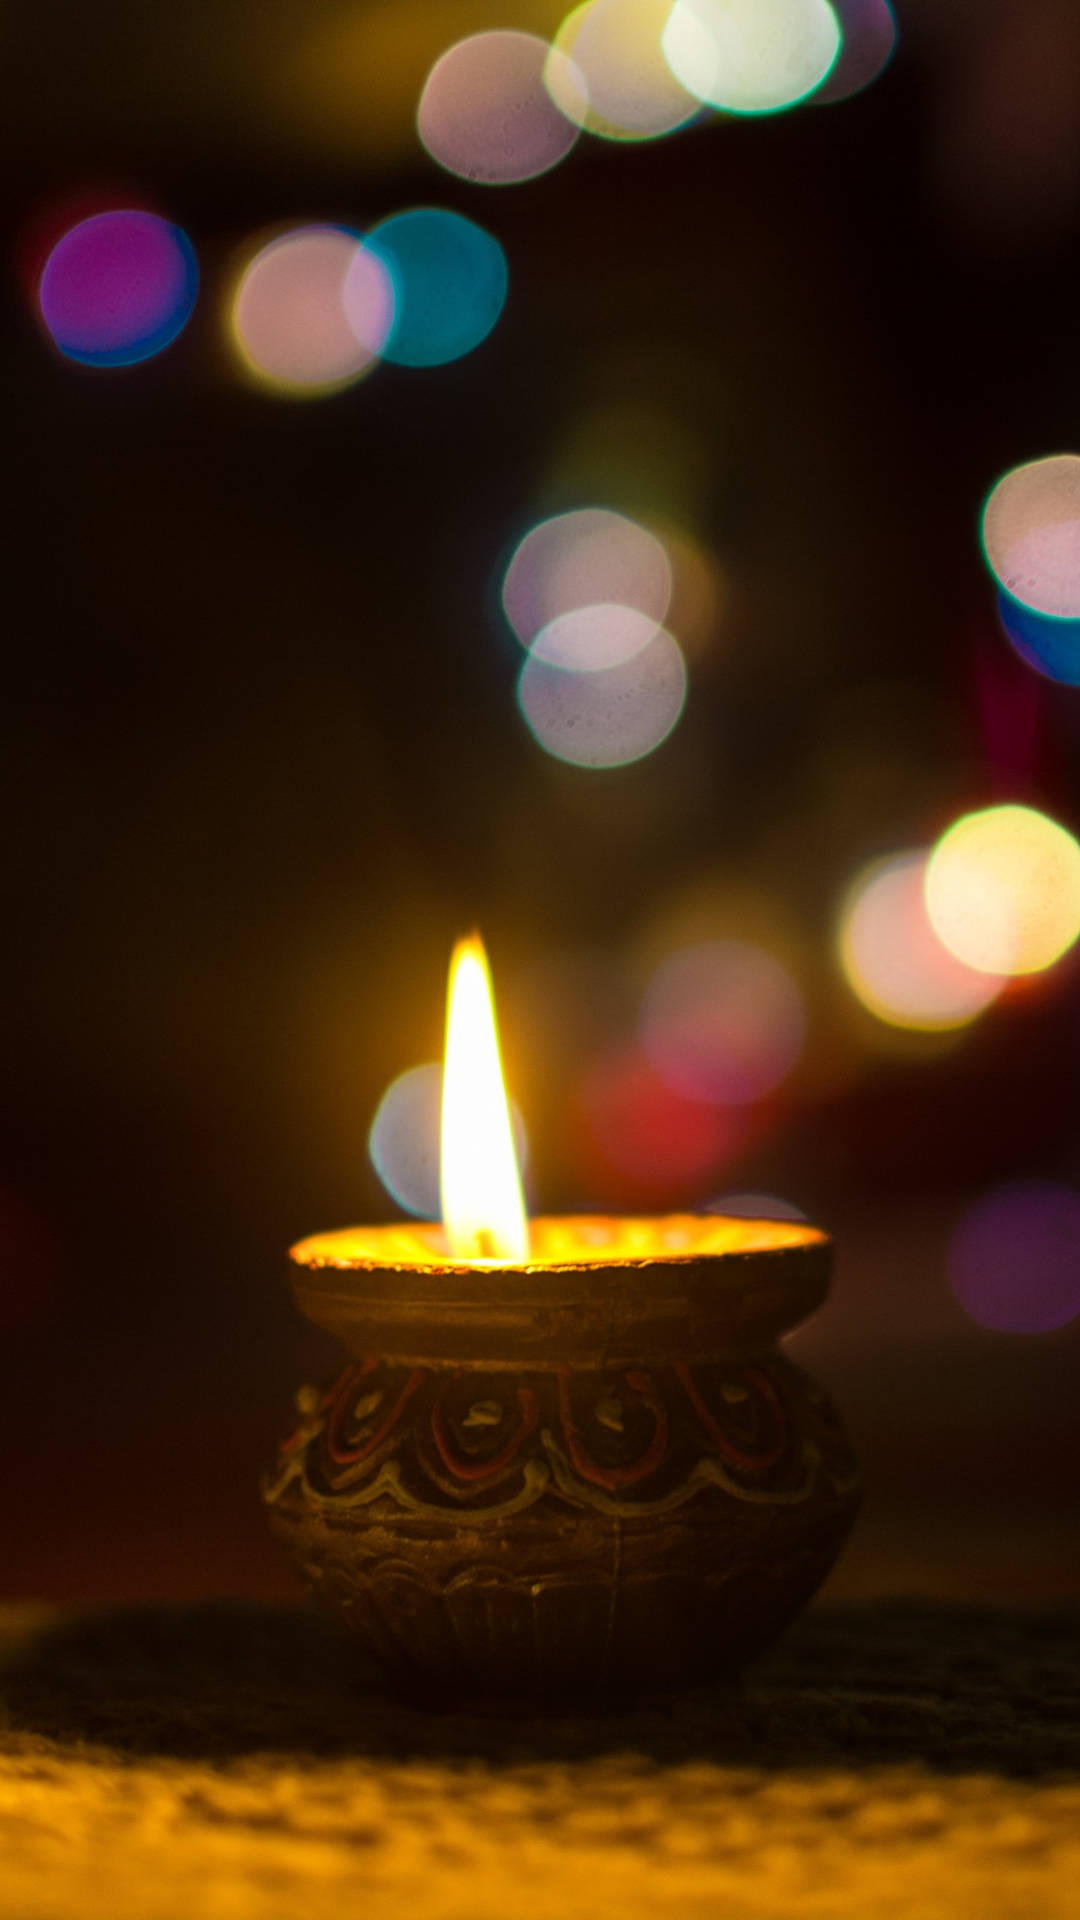 Samsung Galaxy S7 Edge Candle Background